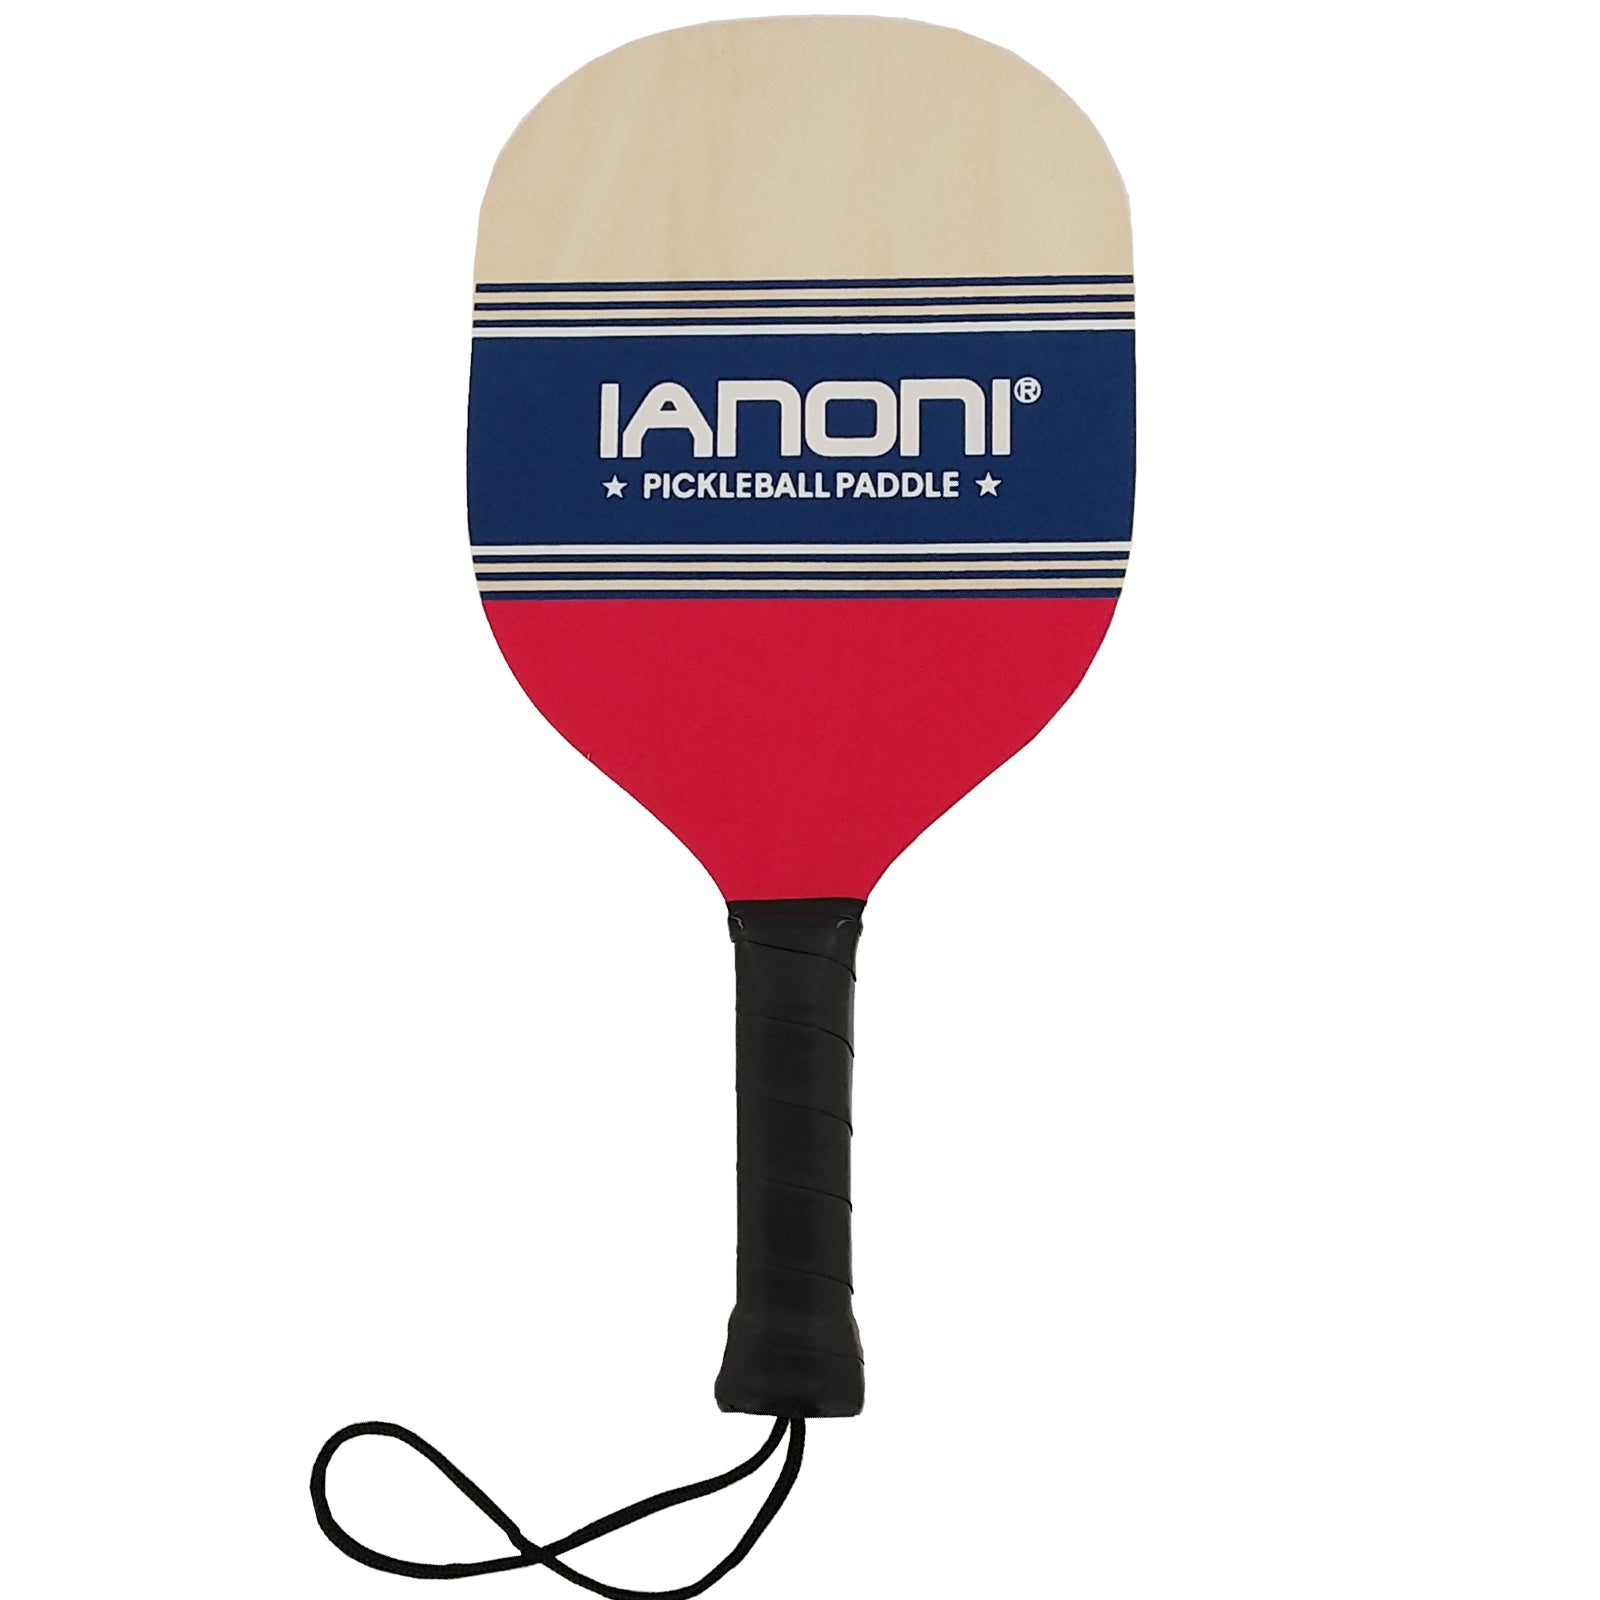 CORE PICKLEBALL PADDLE SET - 4 Wood Pickleball Paddles, 2 Outdoor